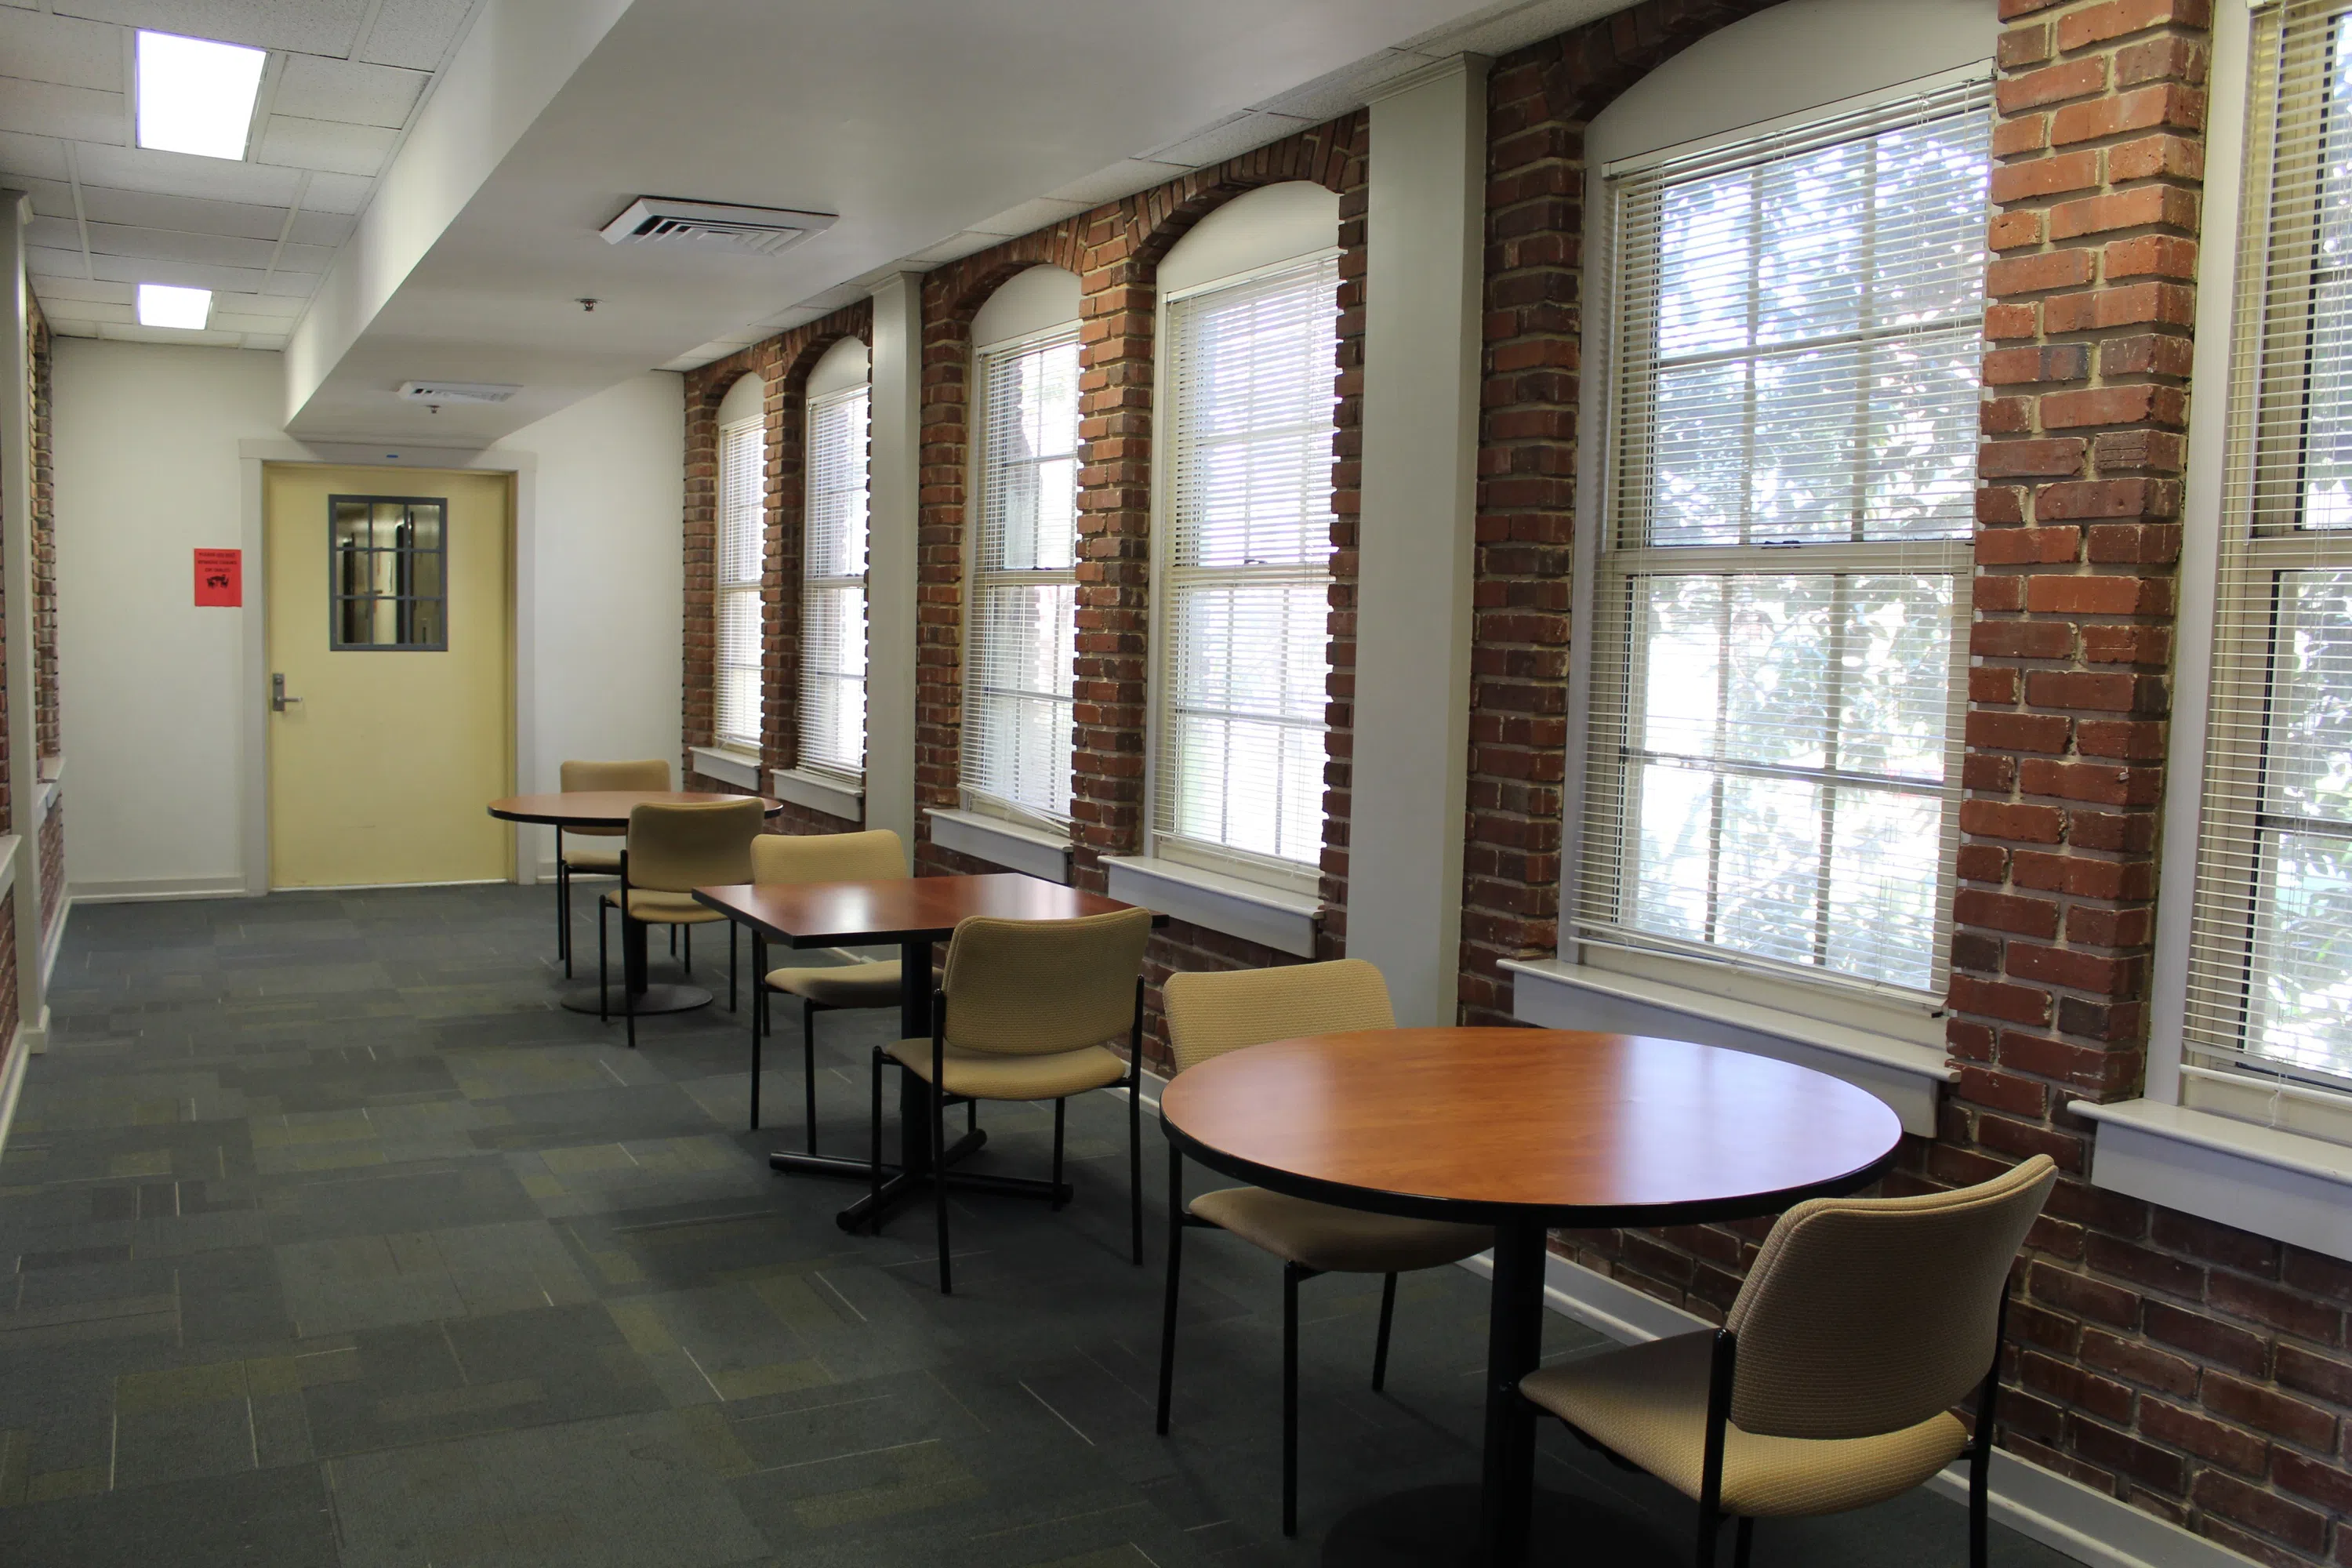 A study room with large windows